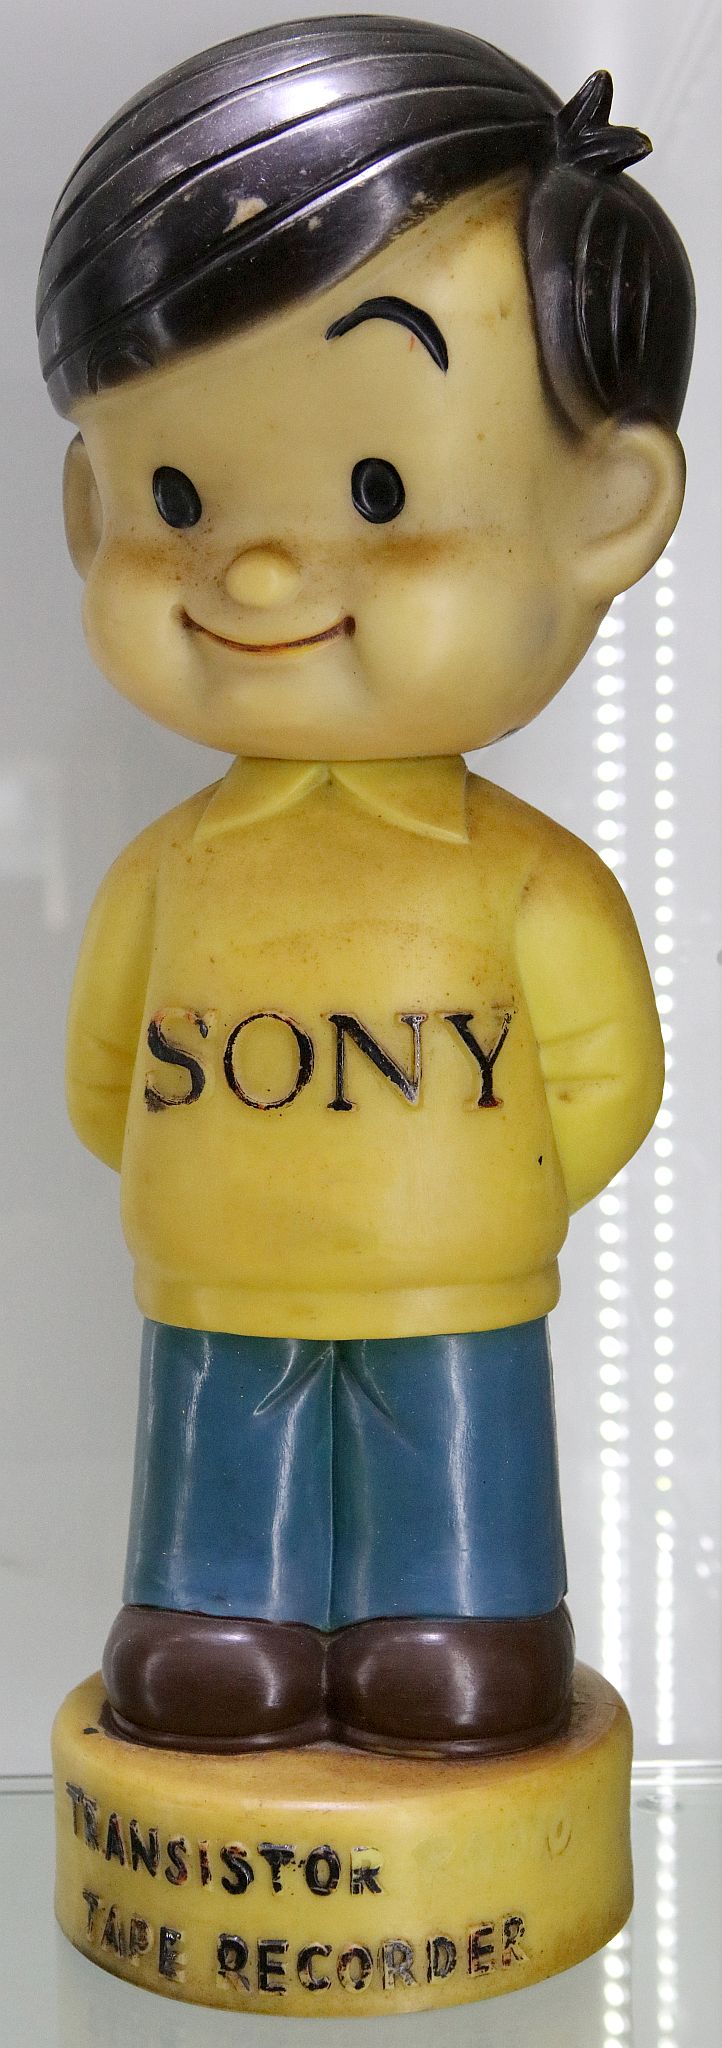 Sony - a shop display of a young boy in yellow T-shirt with the word 'Sony', supported on a circular